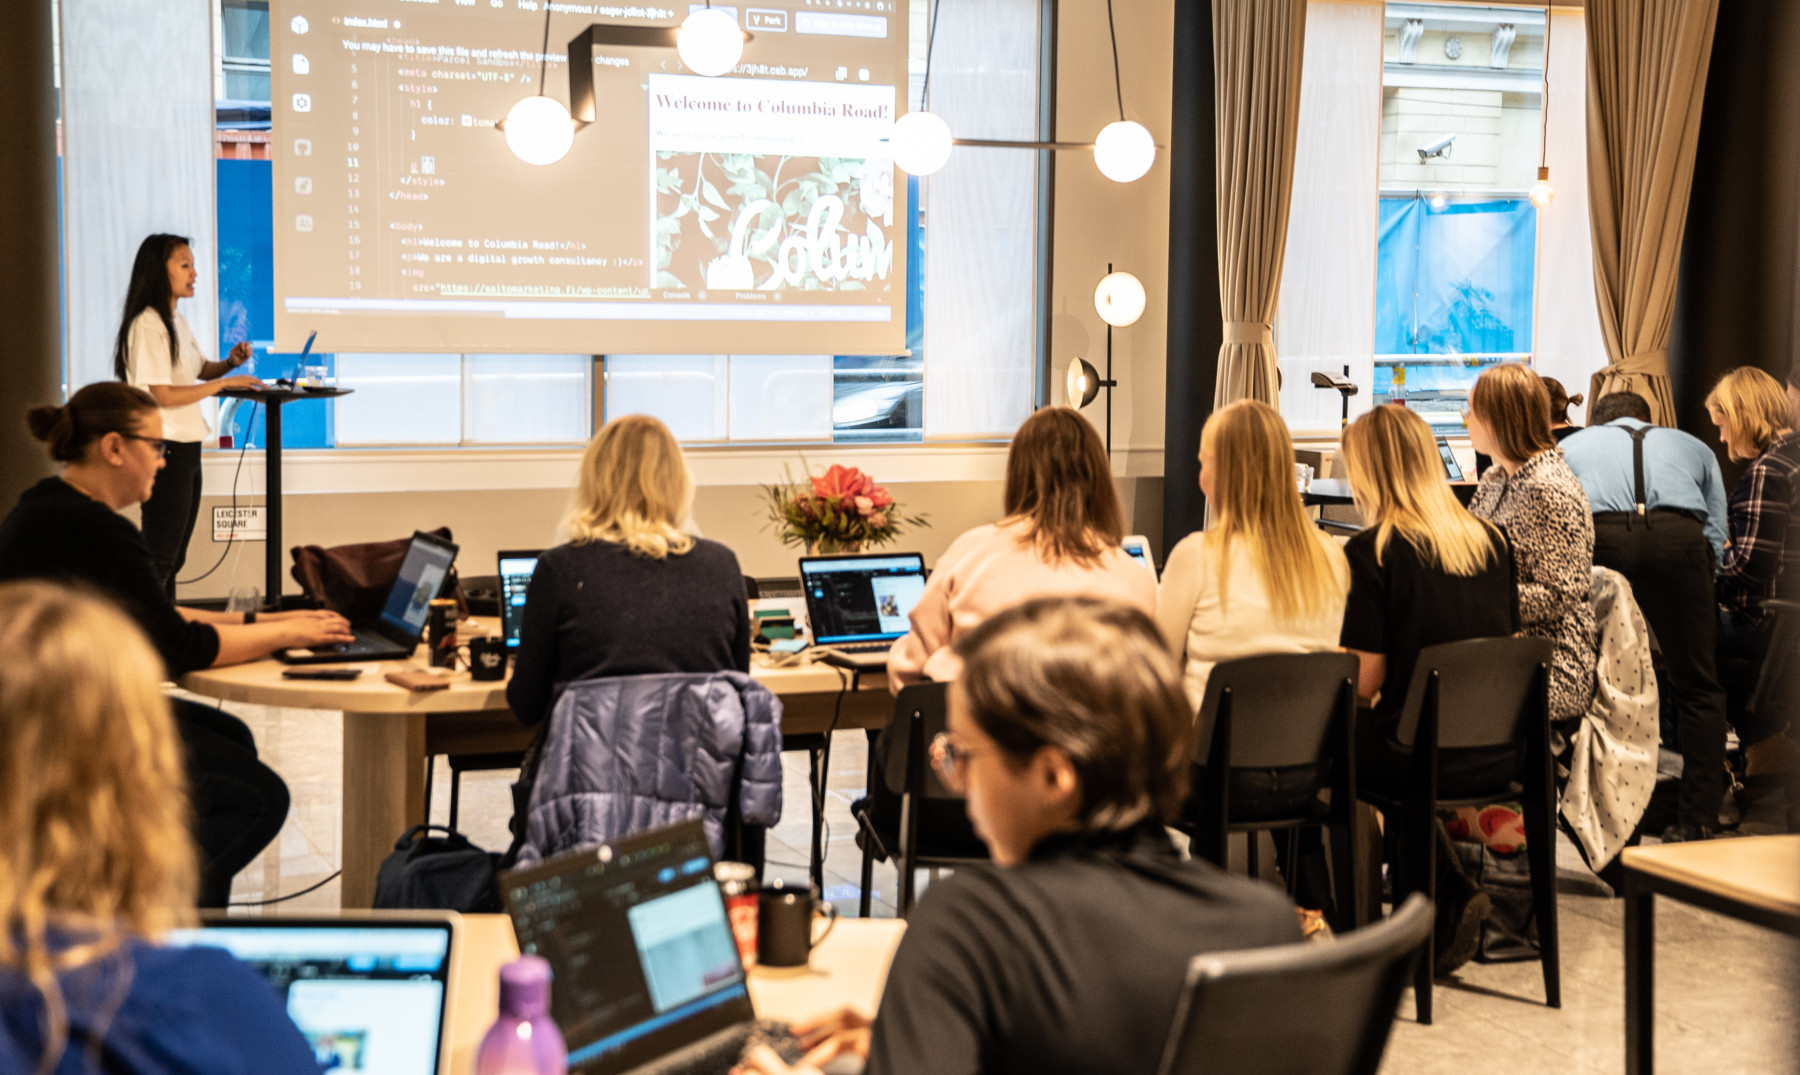 With their computers open, a group of women are watching another women make a presentation.